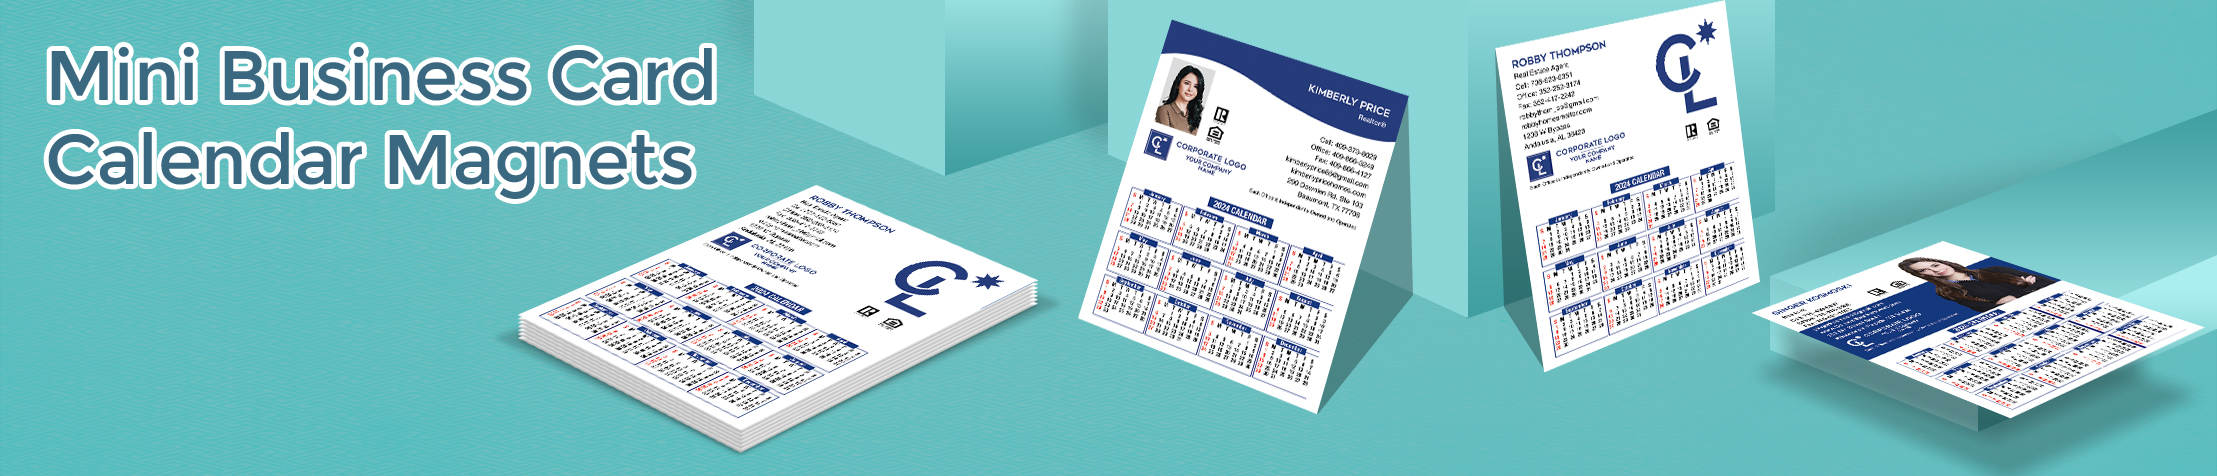 Coldwell Banker Real Estate Mini Business Card Calendar Magnets - Coldwell Banker  2019 calendars with photo and contact info, 3.5” by 4.25” | BestPrintBuy.com